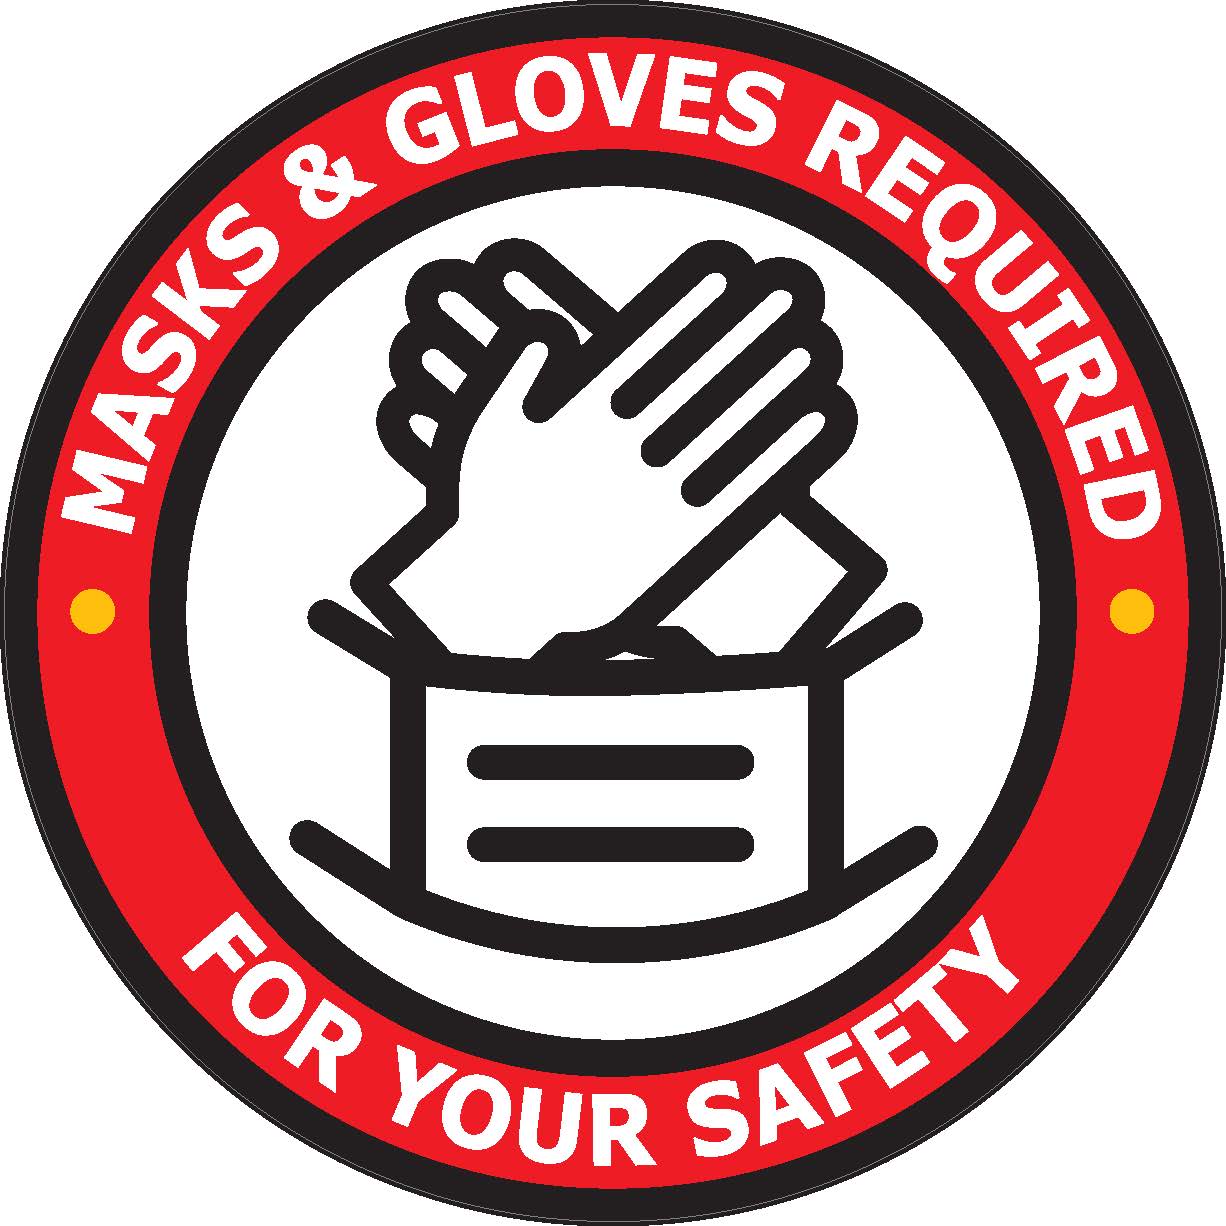 4 pack - Mask & Gloves Required 6" Door Decal